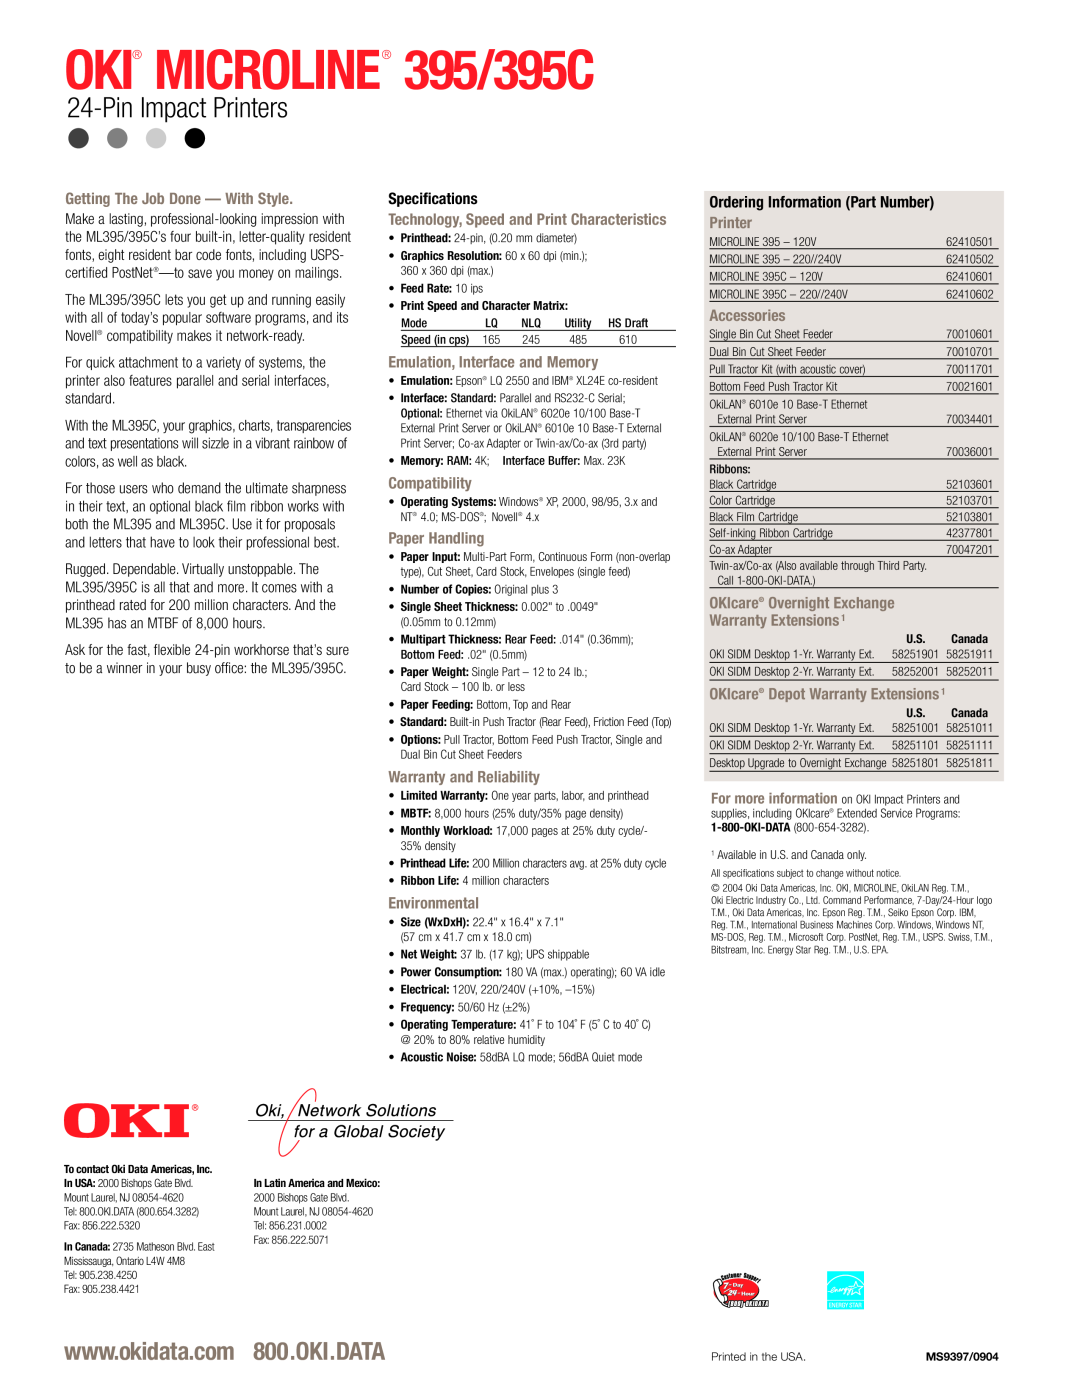 Oki warranty OKI MICROLINE 395/395C, Pin Impact Printers, Getting The Job Done - With Style, Specifications 